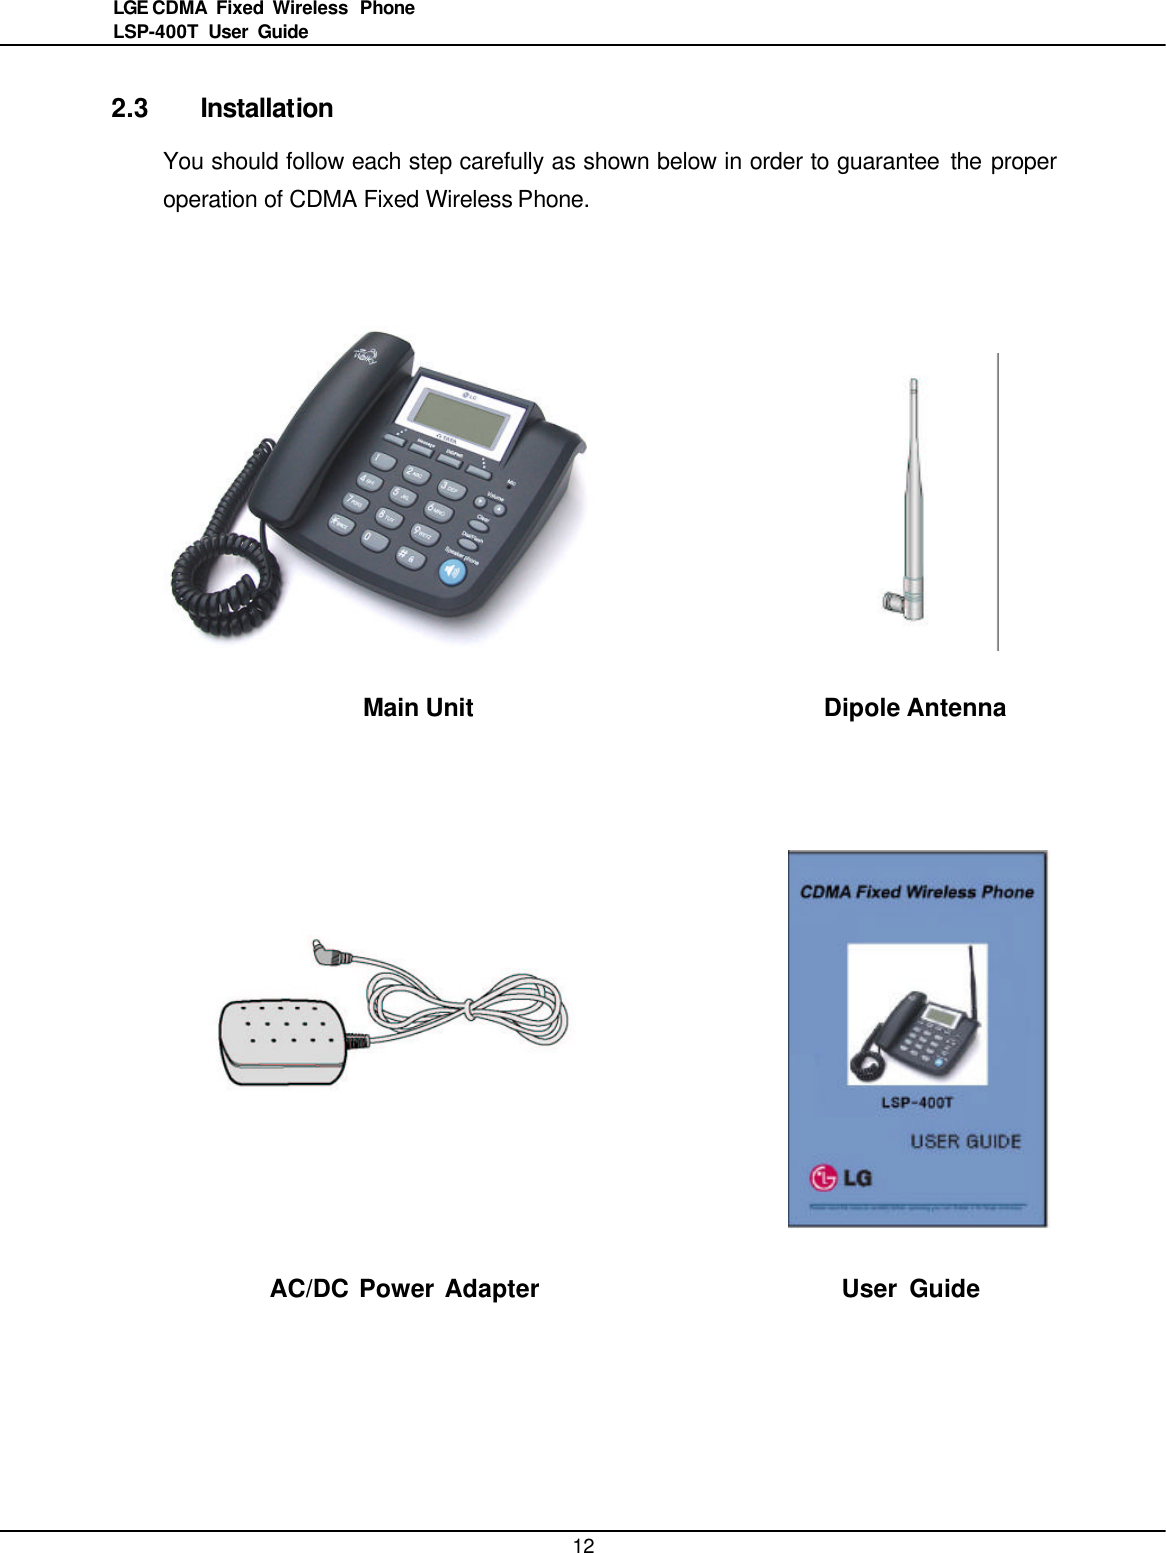   12LGE CDMA Fixed Wireless  Phone LSP-400T  User Guide  2.3 Installation You should follow each step carefully as shown below in order to guarantee the proper operation of CDMA Fixed Wireless Phone.                    Main Unit    Dipole Antenna        AC/DC Power Adapter             User Guide  